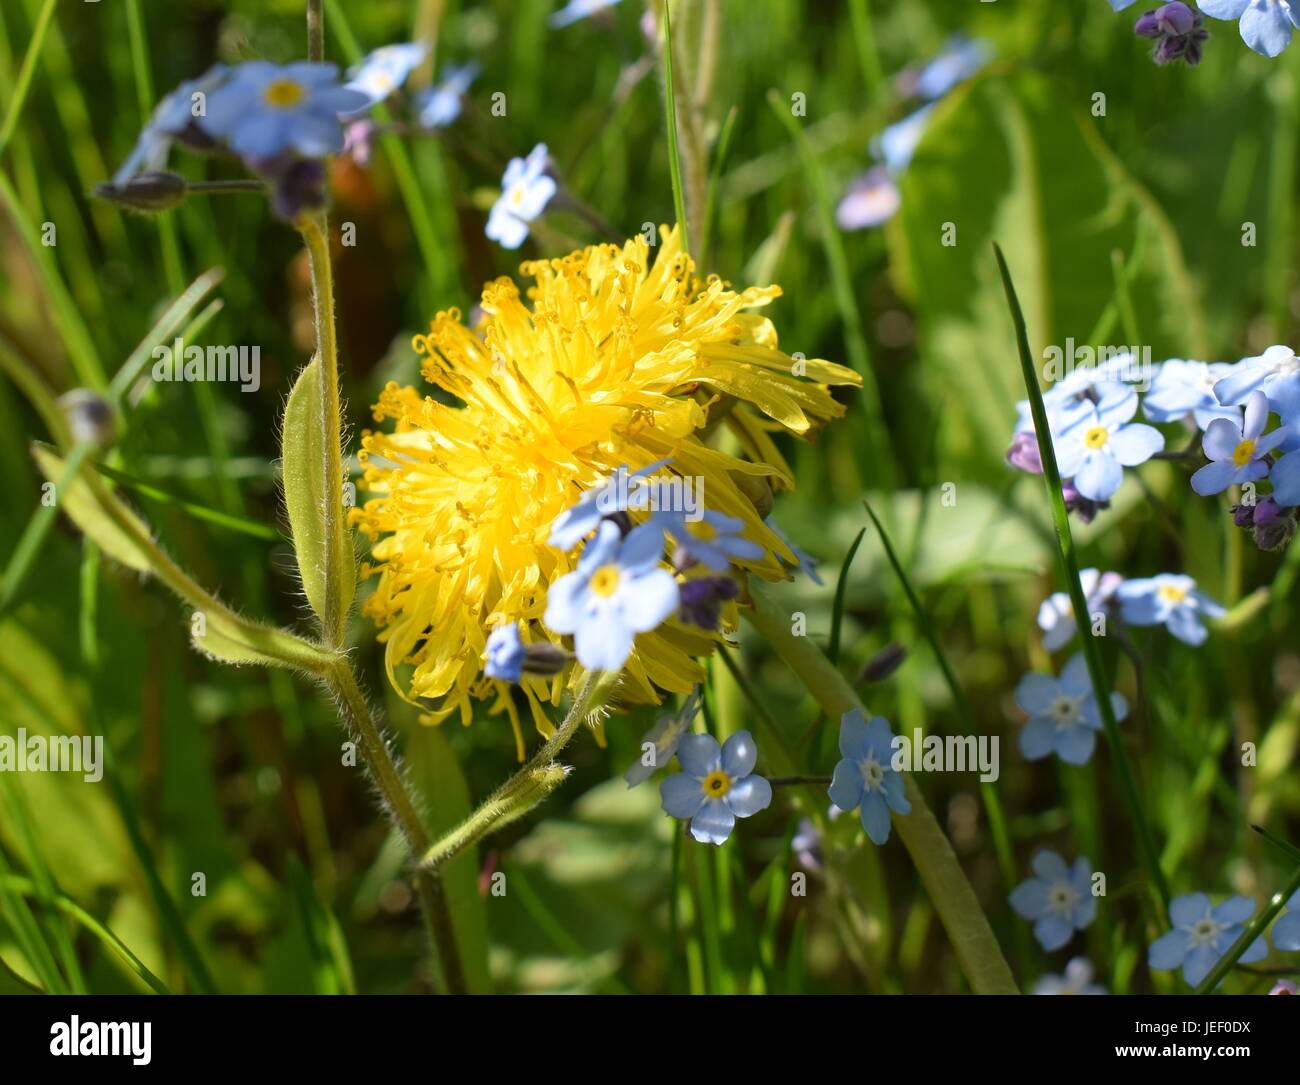 Dandelion flower surrounded by forget-me-nots Stock Photo